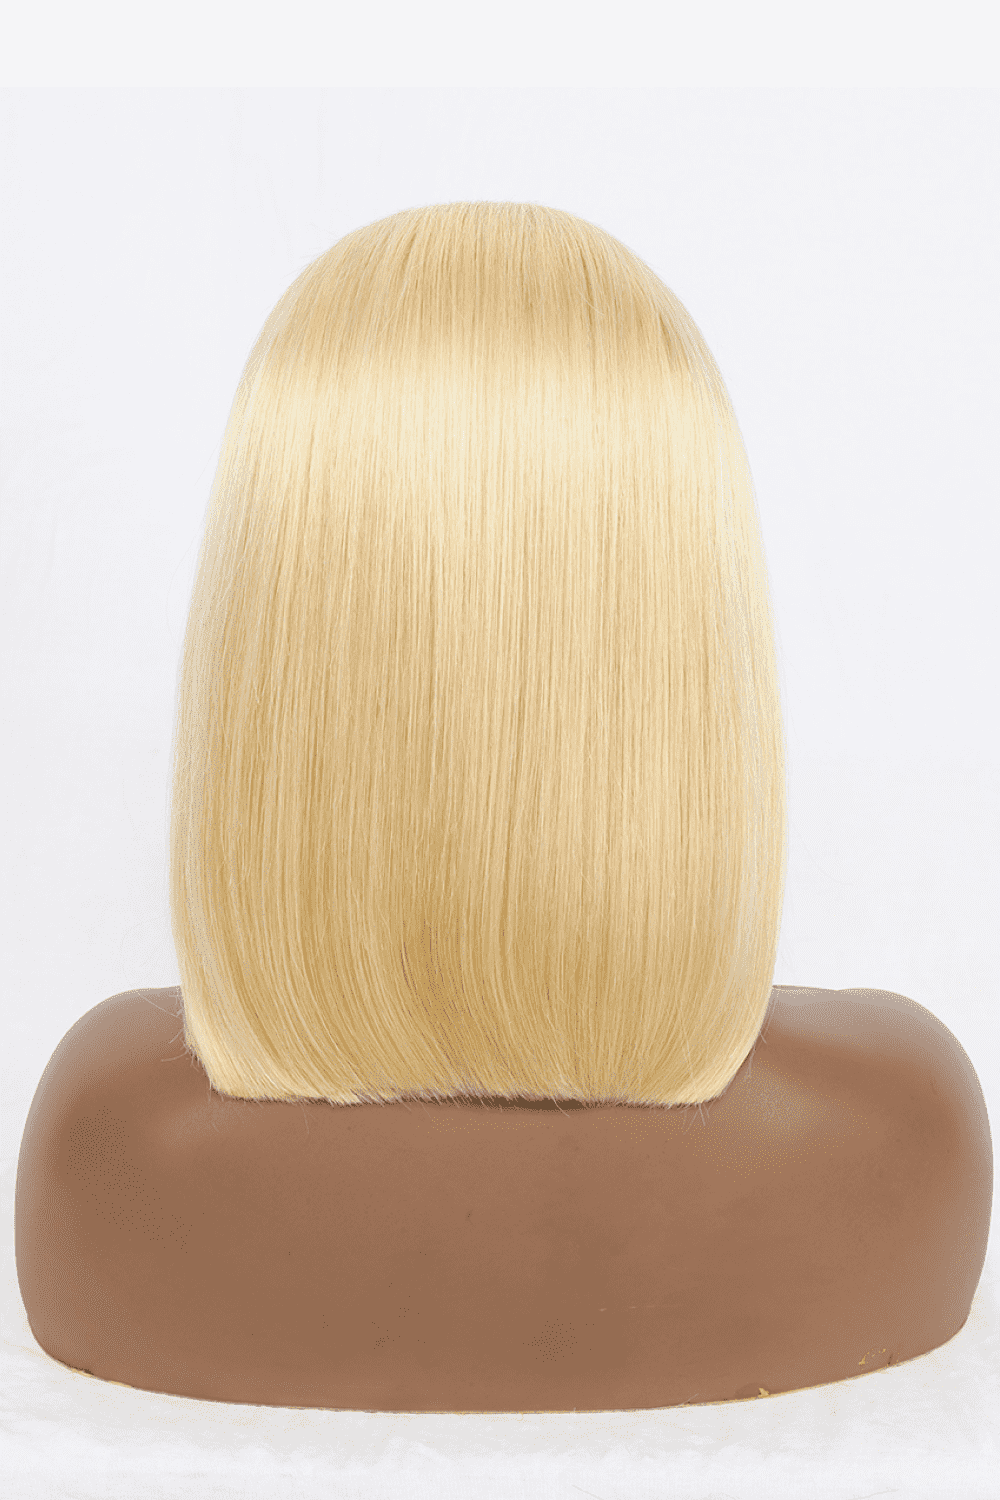 Blonde One Size Lace Front Bobo Human Hair Wigs